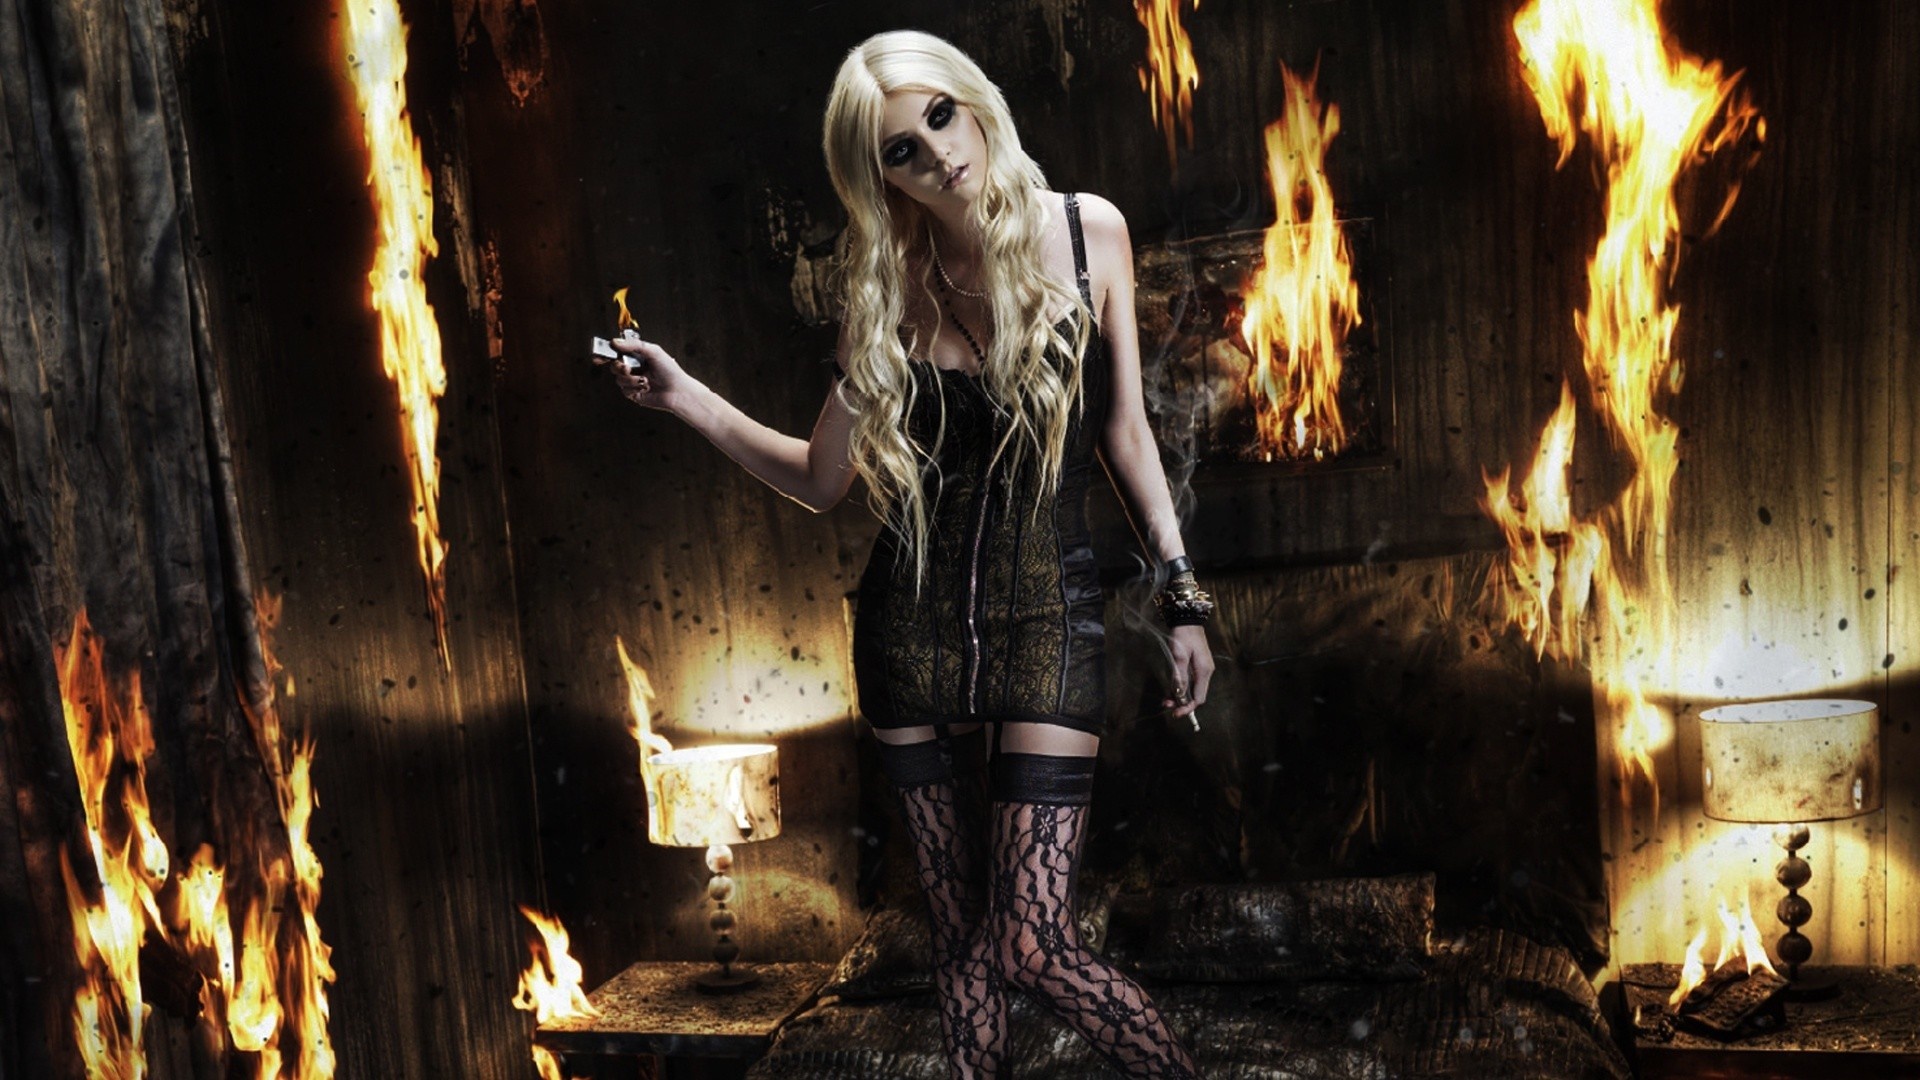 The pretty reckless Wallpaper Background 35236